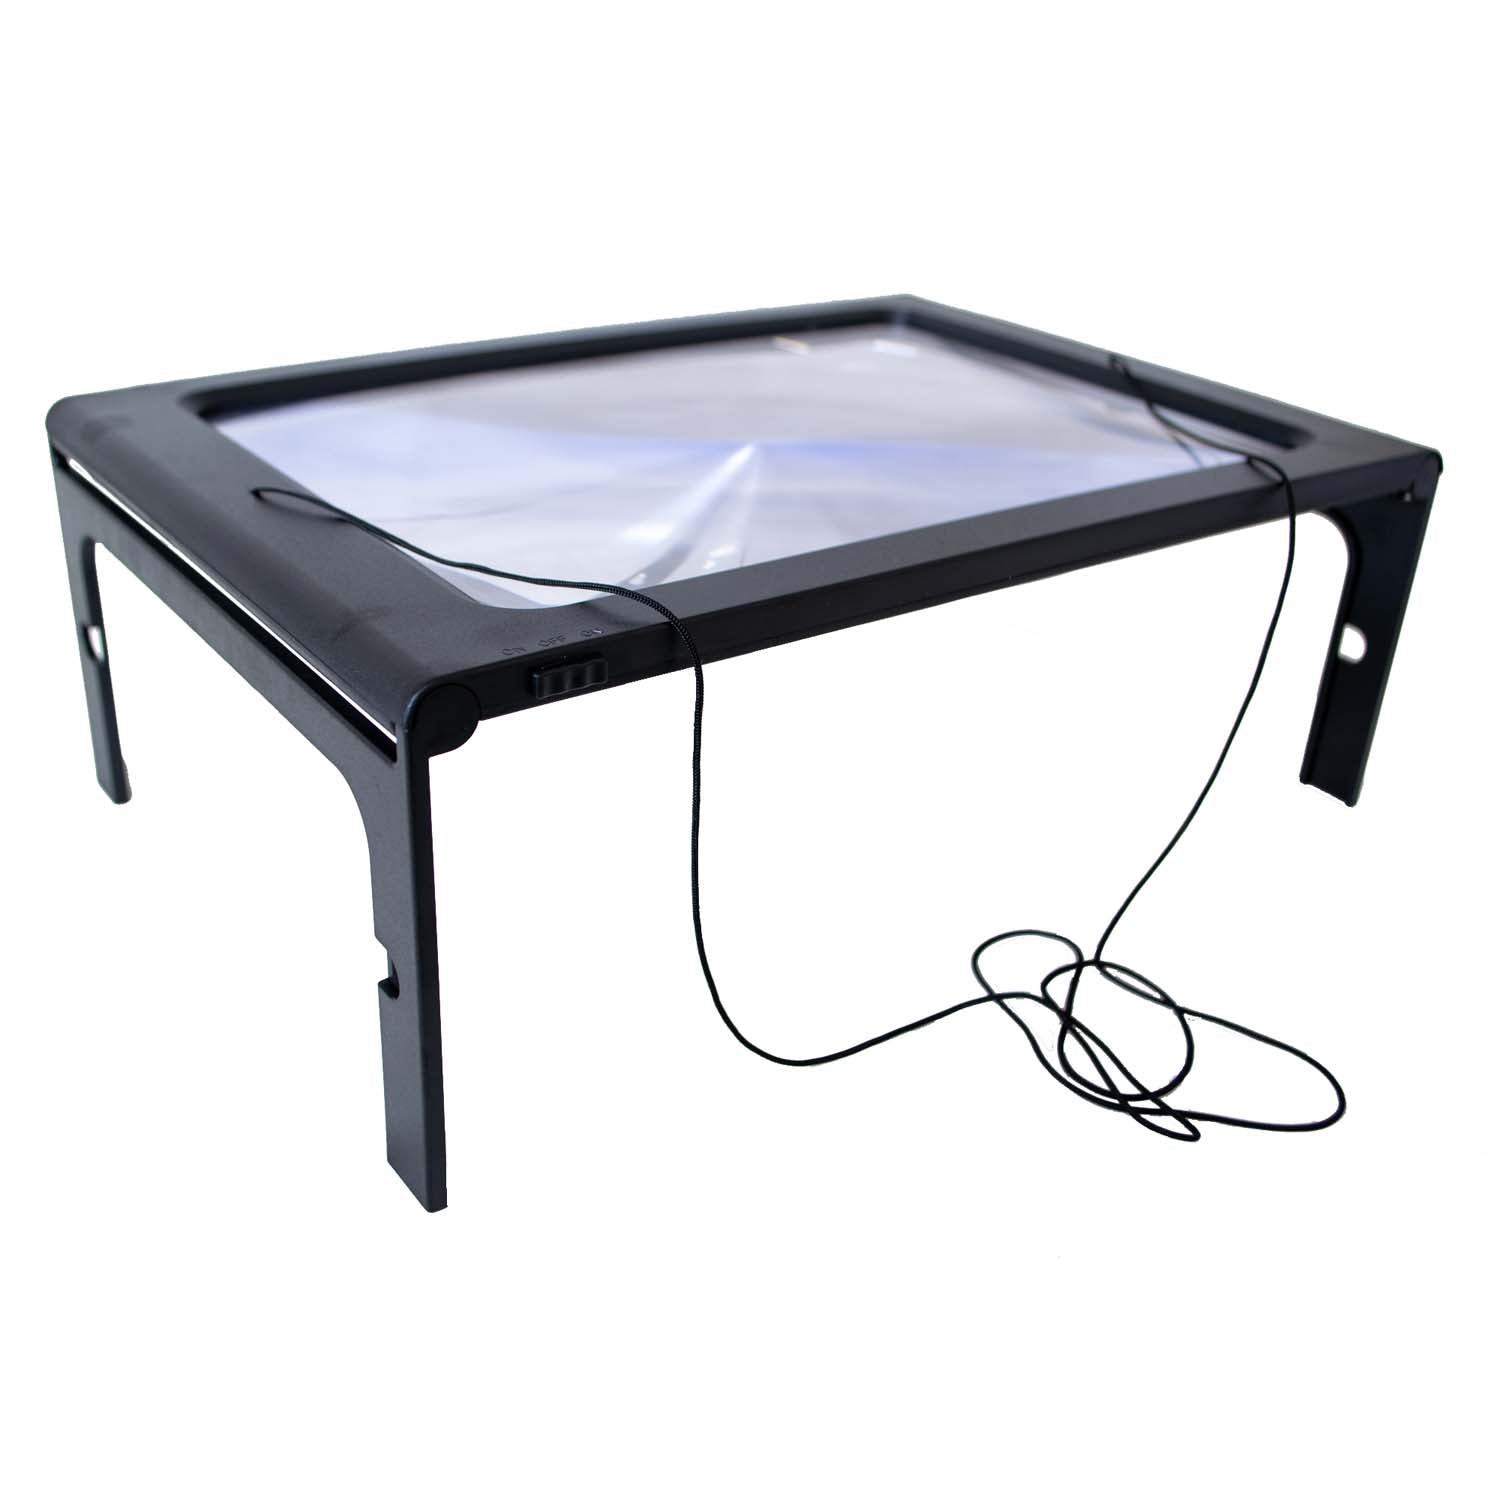 Page-size magnifier, handheld + stand + hangs around neck